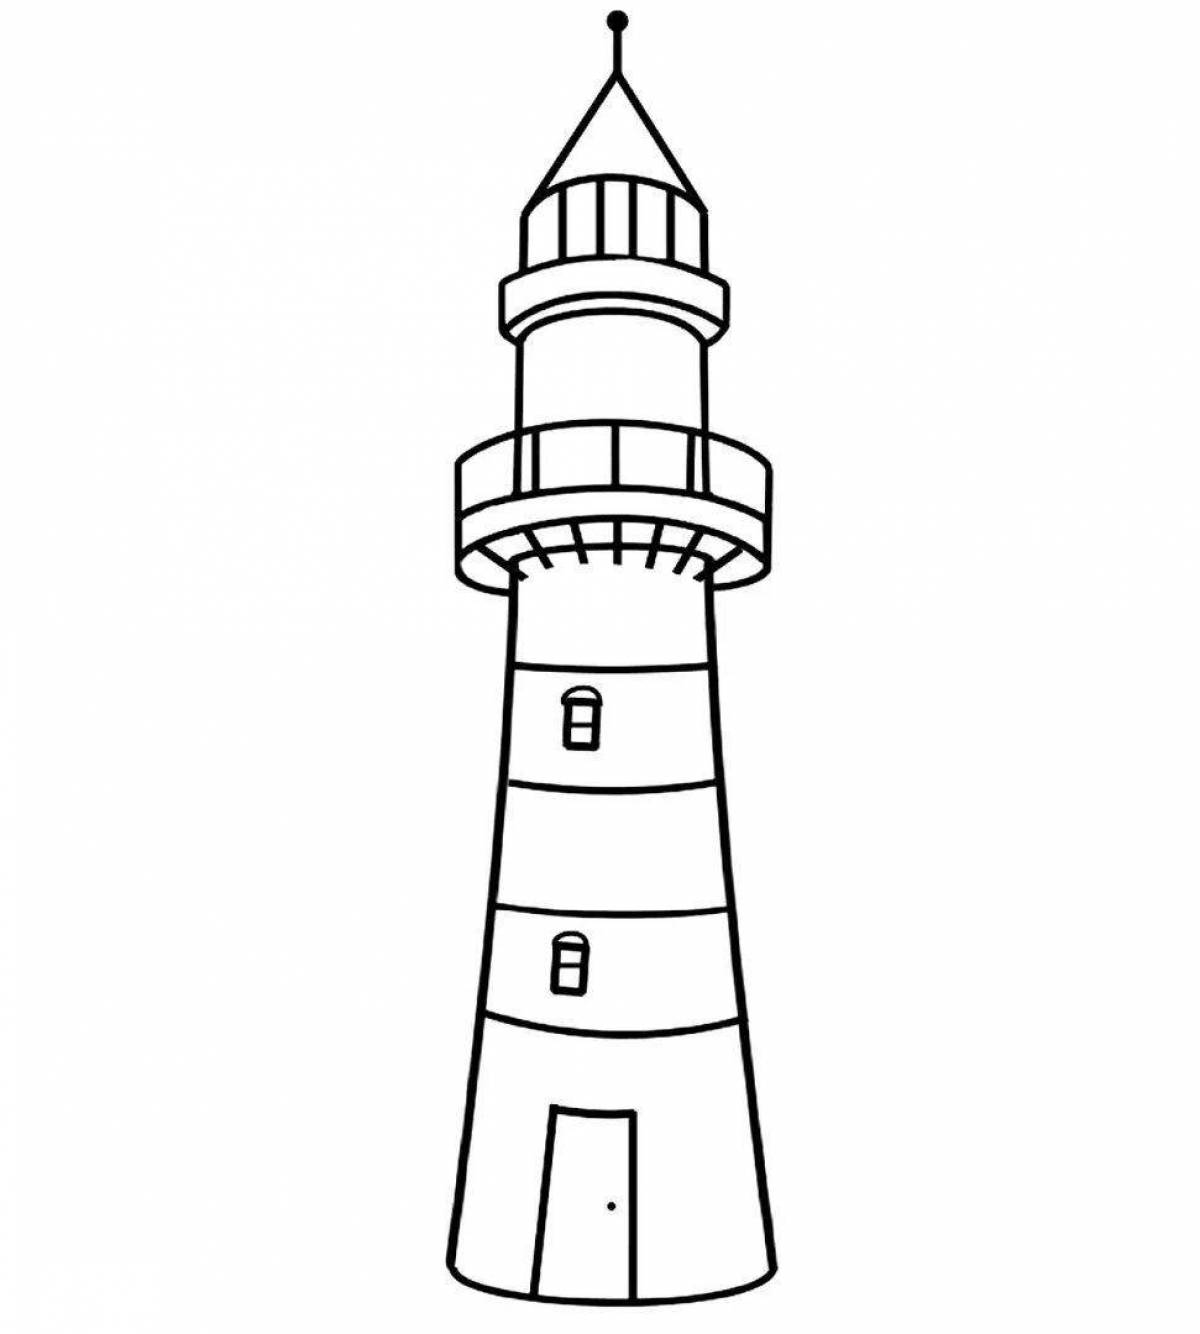 Fancy lighthouse coloring book for kids